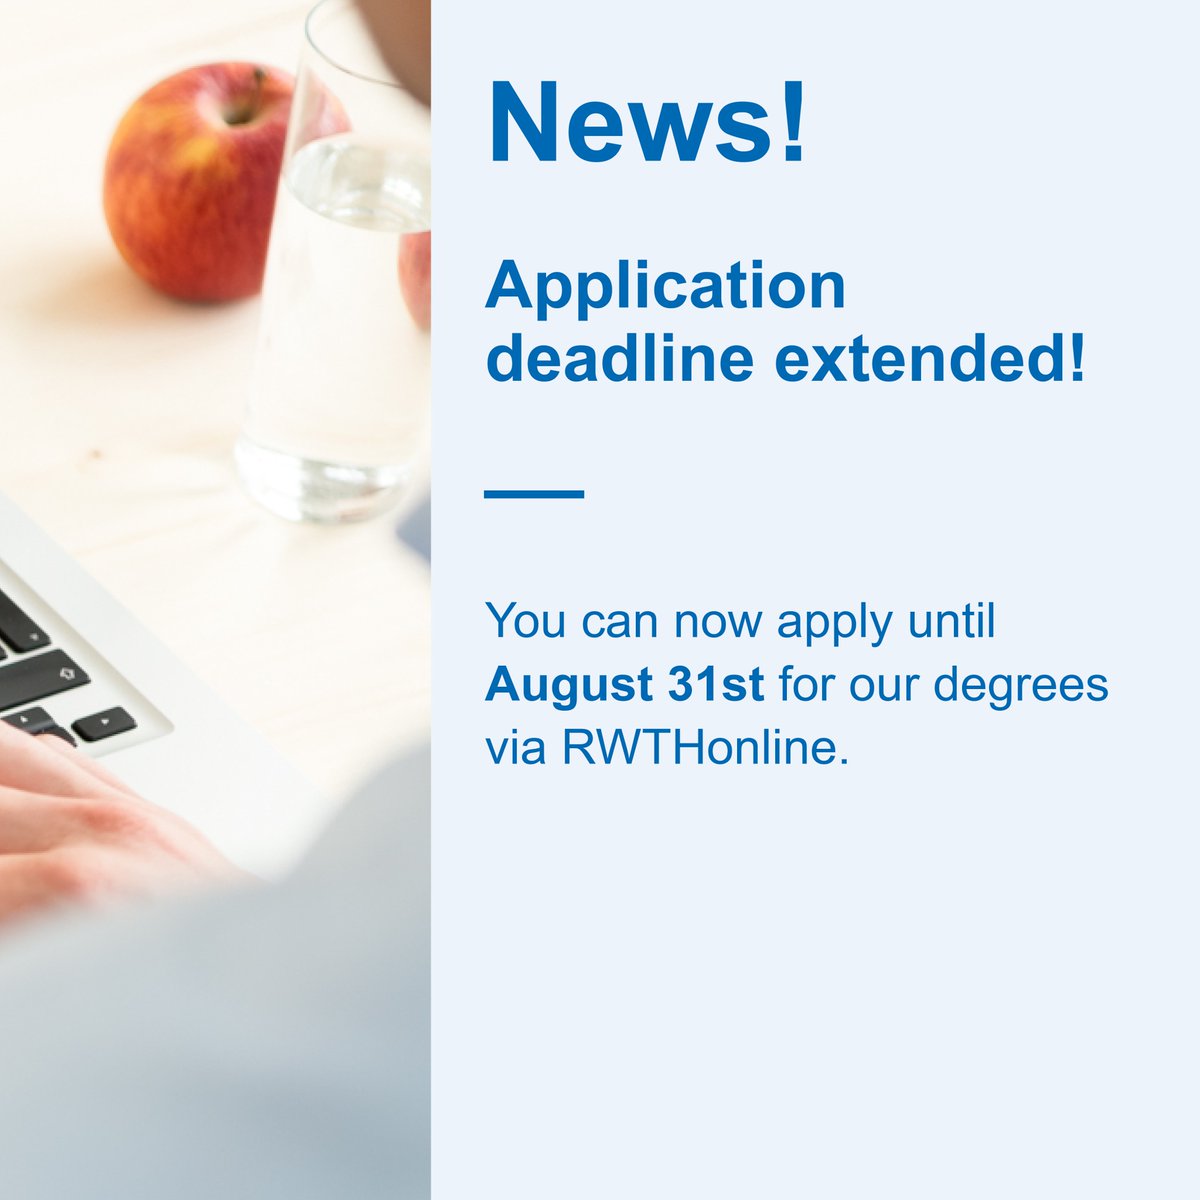 📣 Big News!
We extended our #application deadline for all #medical #master programs!
Until August 31st, you can apply via RWTHonline for our three degrees in #MedicalDataScience 👩‍💻, #LaboratoryAnimalScience 🔬 & #Periodontology 🦷

You can apply here: online.rwth-aachen.de